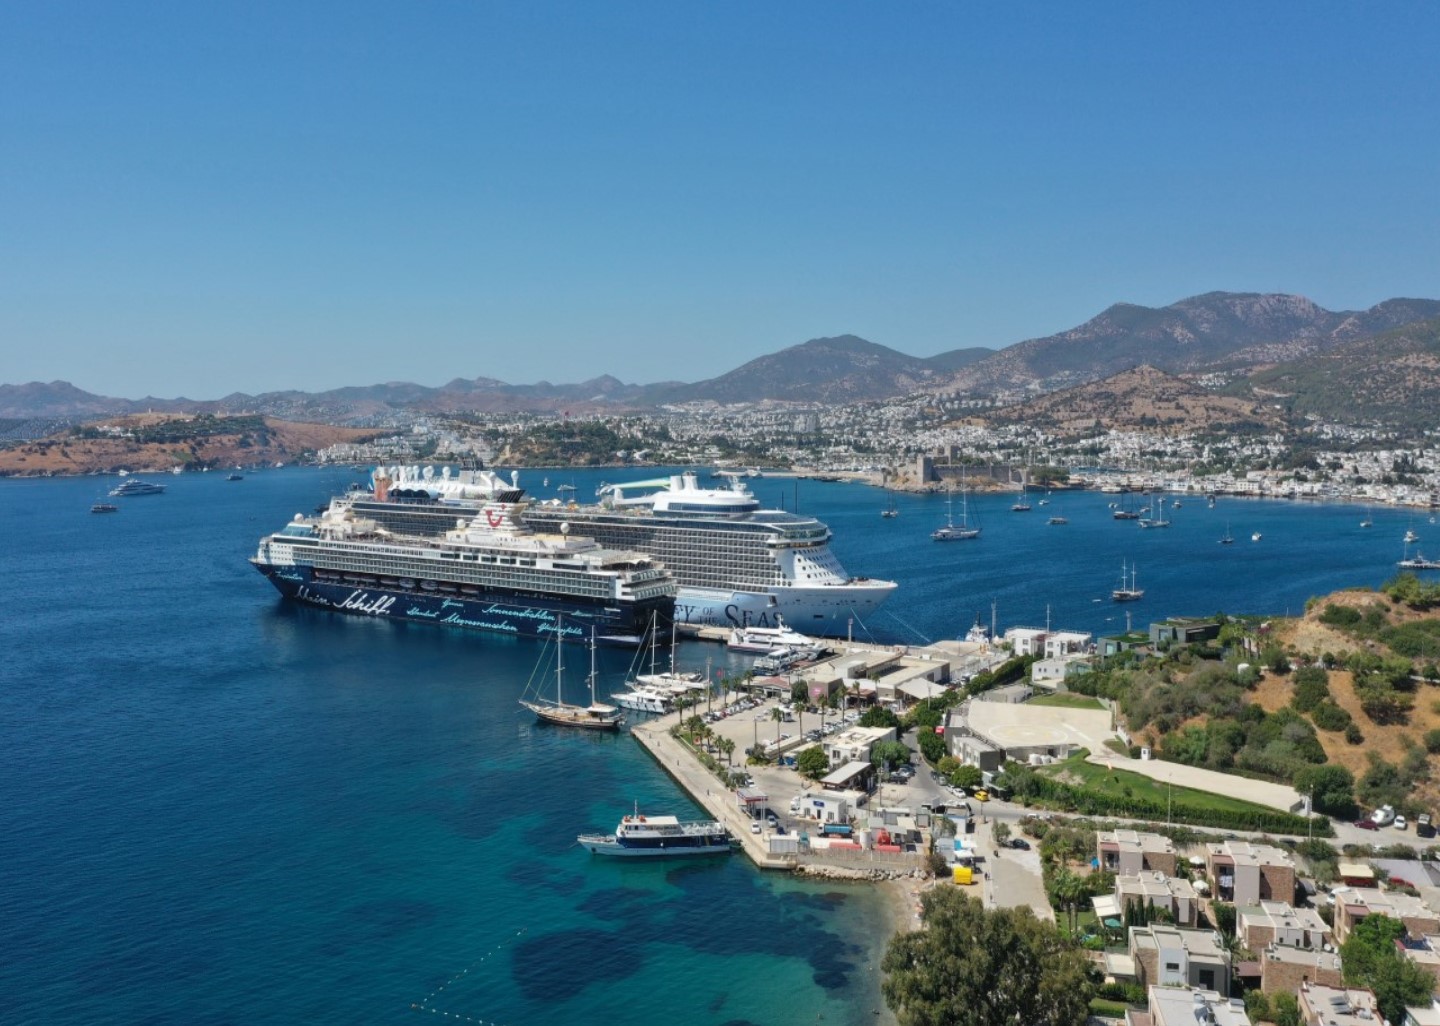 Bodrum ends the season with a record number of cruise lines: The 101st and last ship, Costa Venezia, completed the 2022 cruise season.